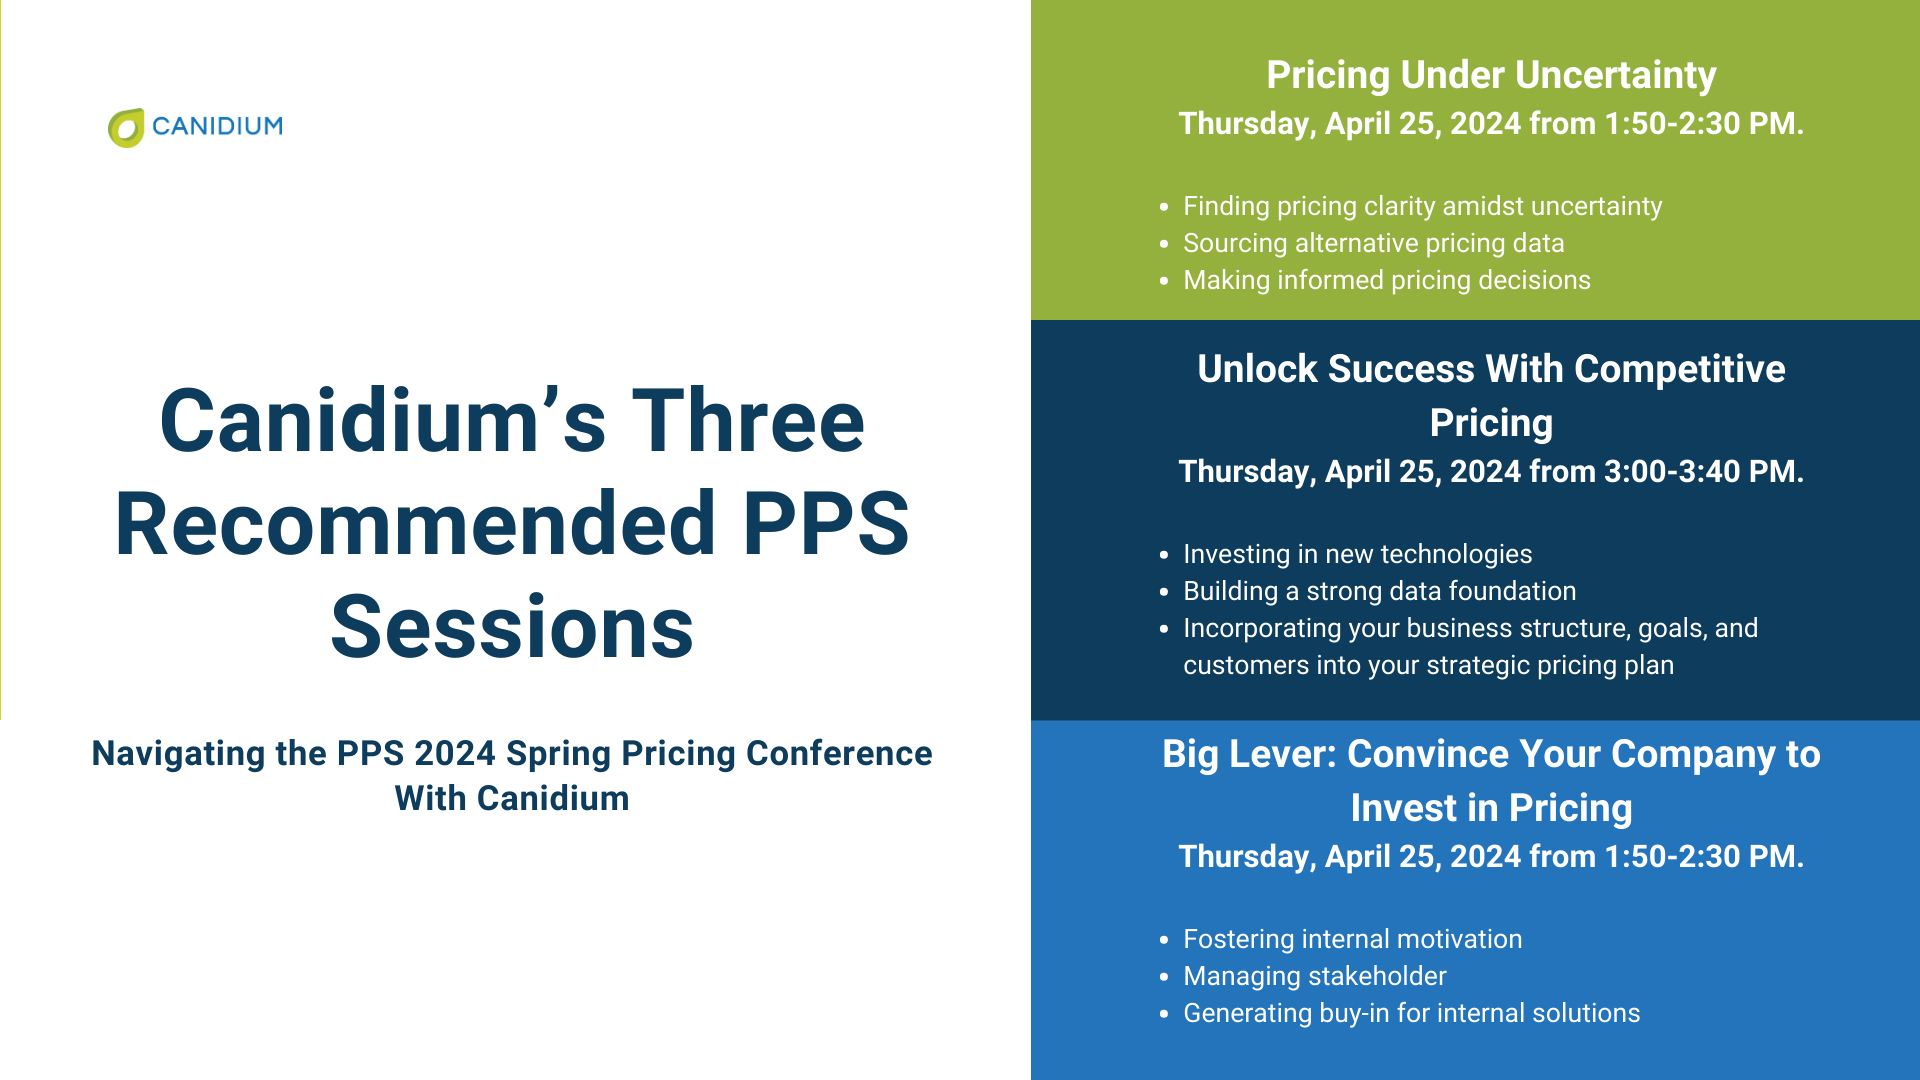 Canidium's Three Recommended PPS Sessions